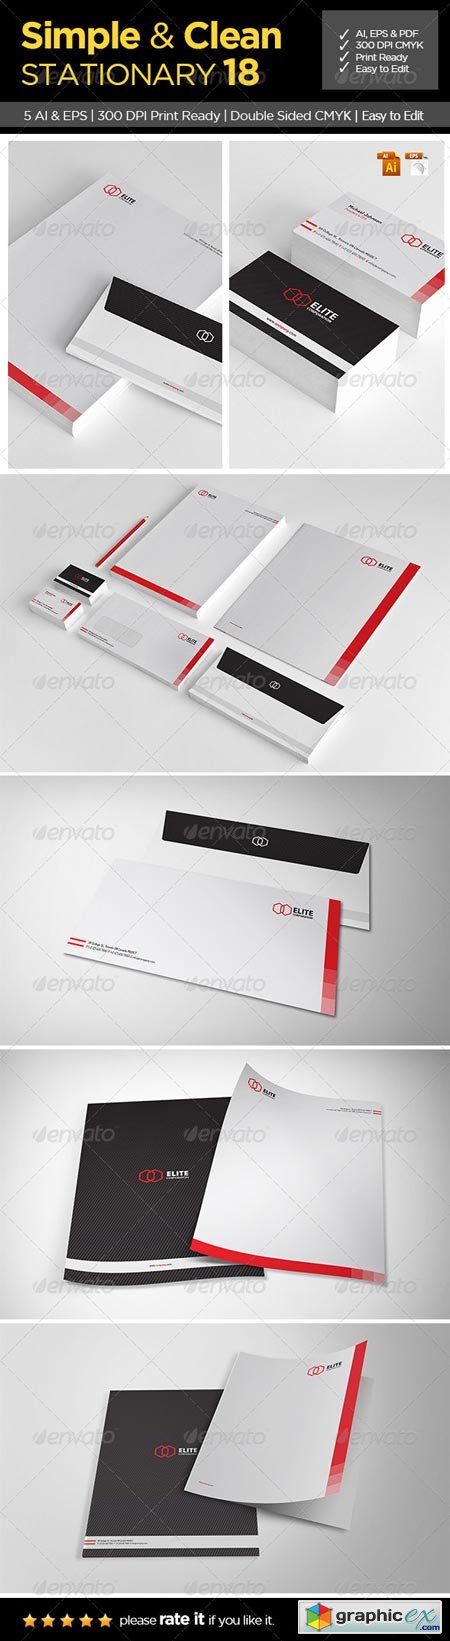 Simple and Clean Stationary 18 6507676